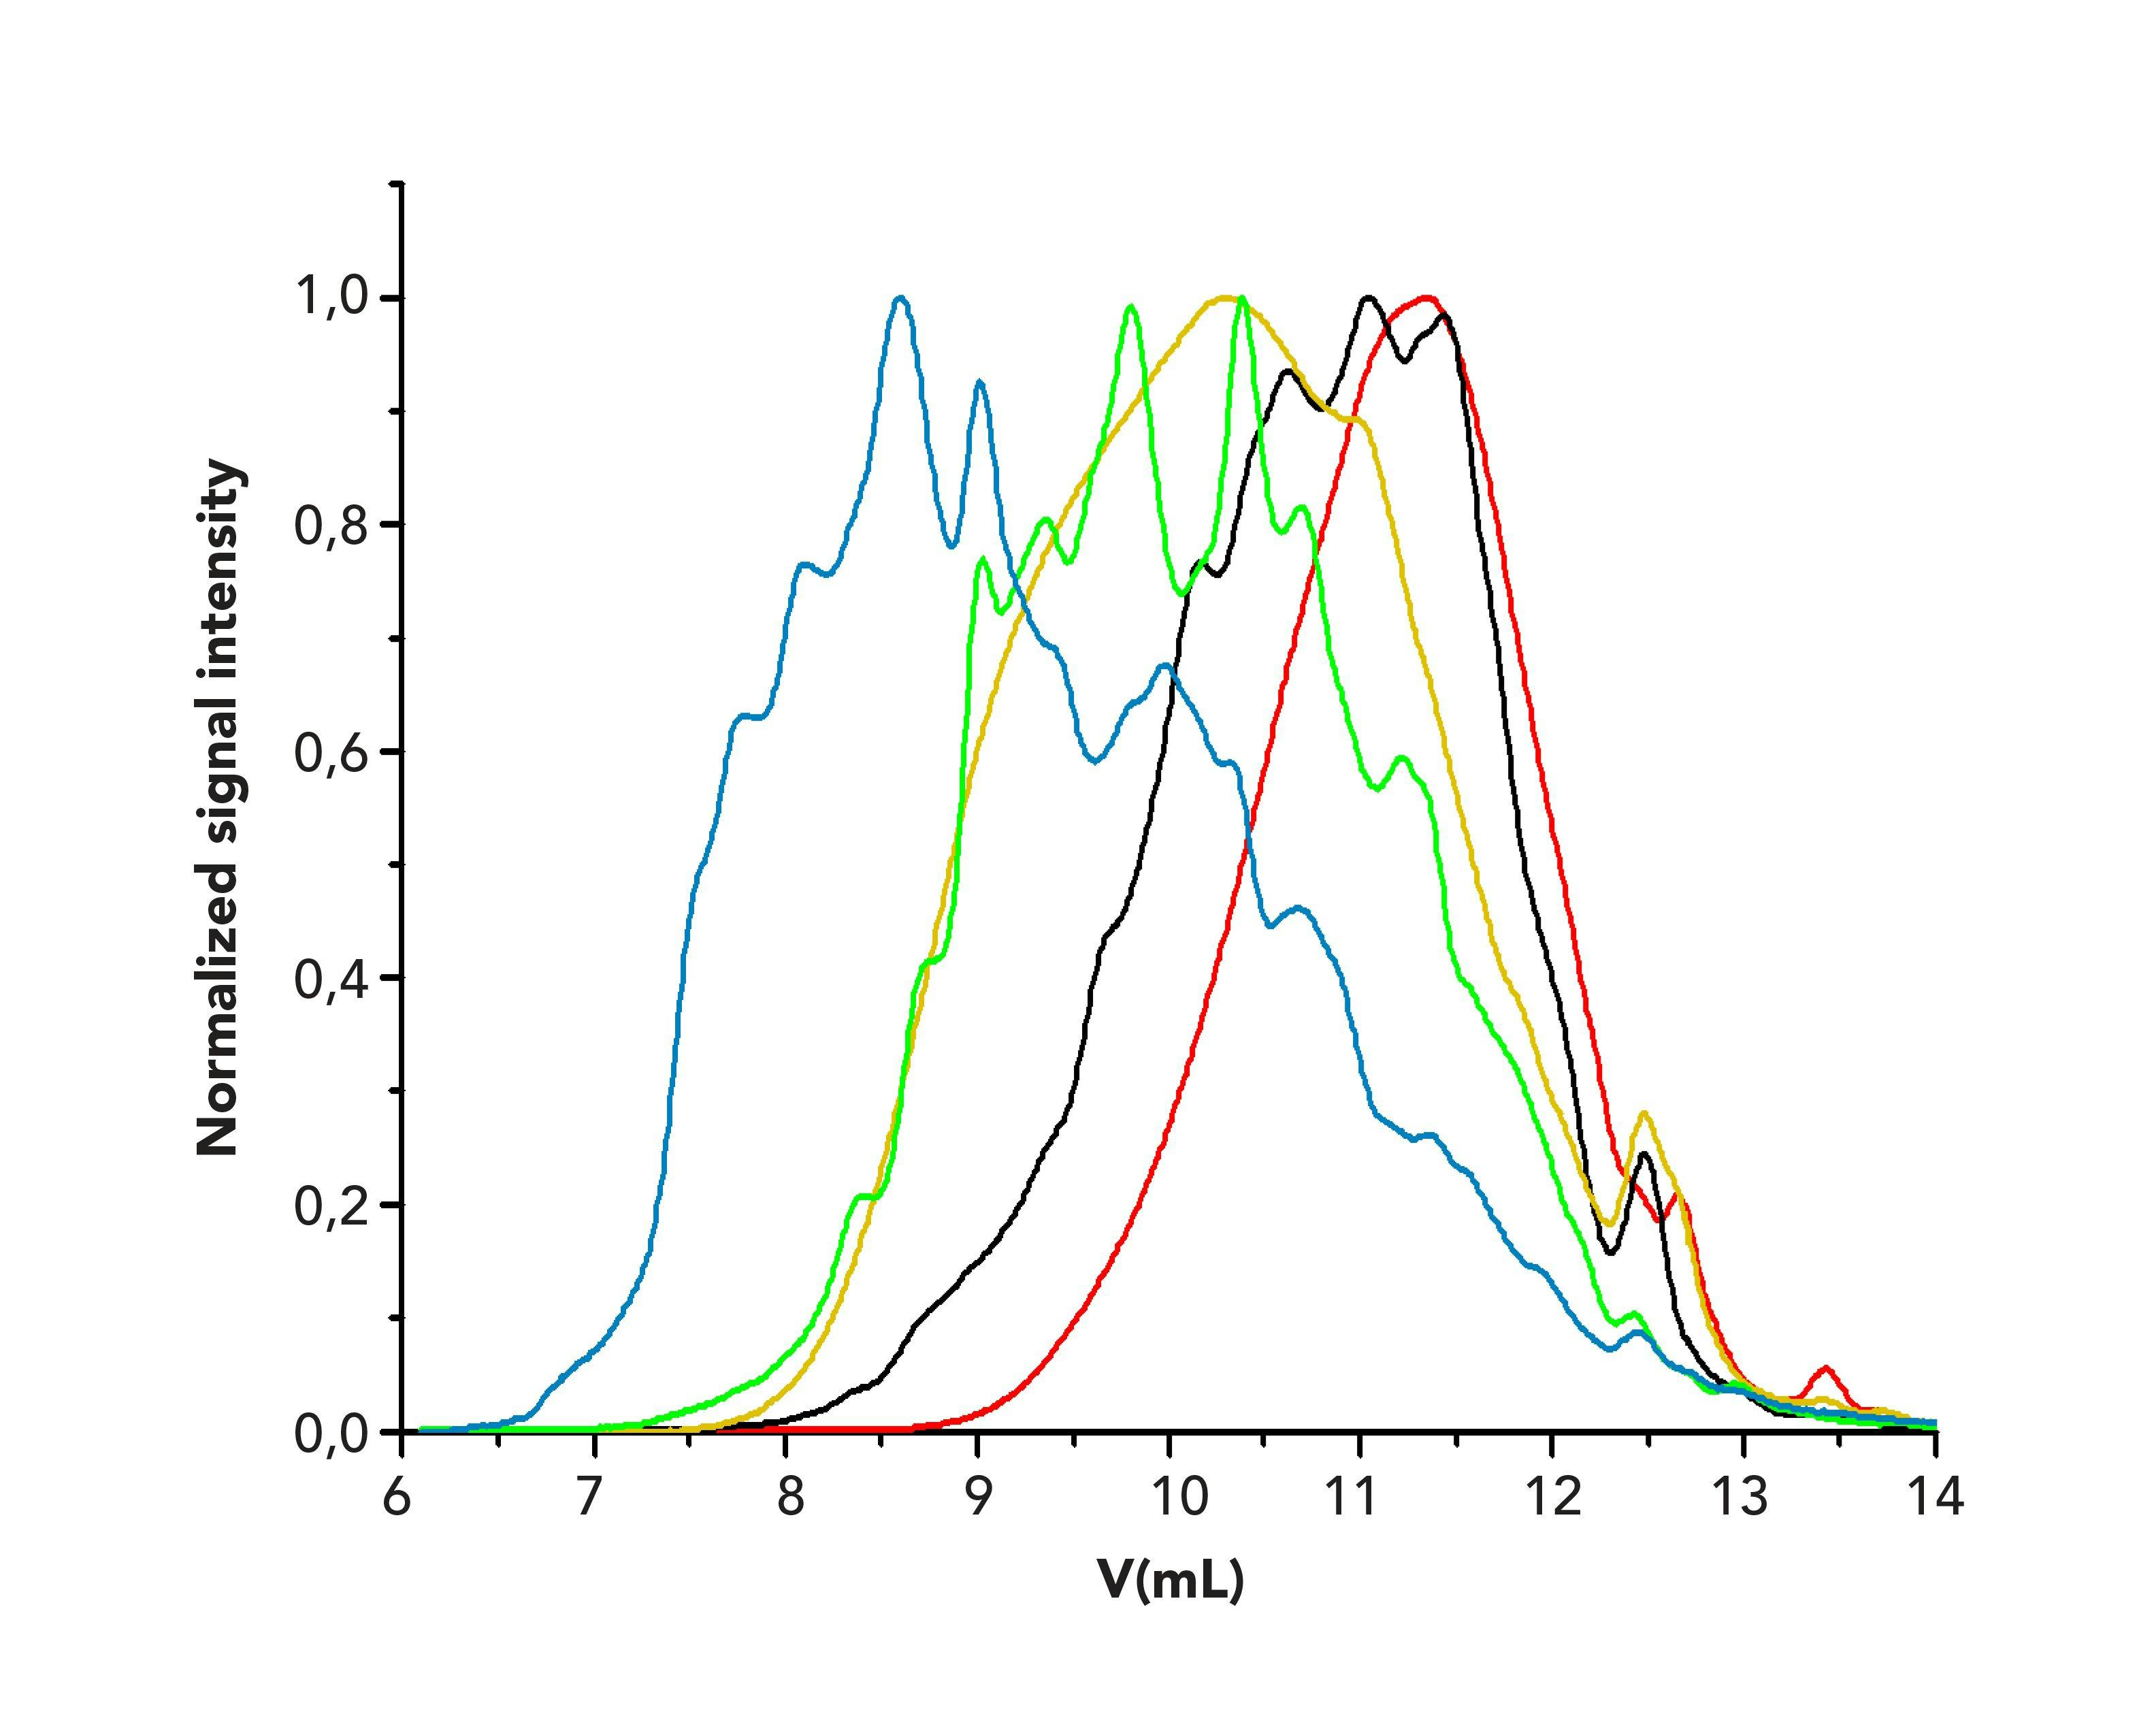 FIGURE 3: Overlay of the chromatograms of the collagen peptides reference materials sample 1 (red), sample 2 (black), sample 3 (orange), sample 4 (green), sample 5 (blue) on a PSS Proteema column.